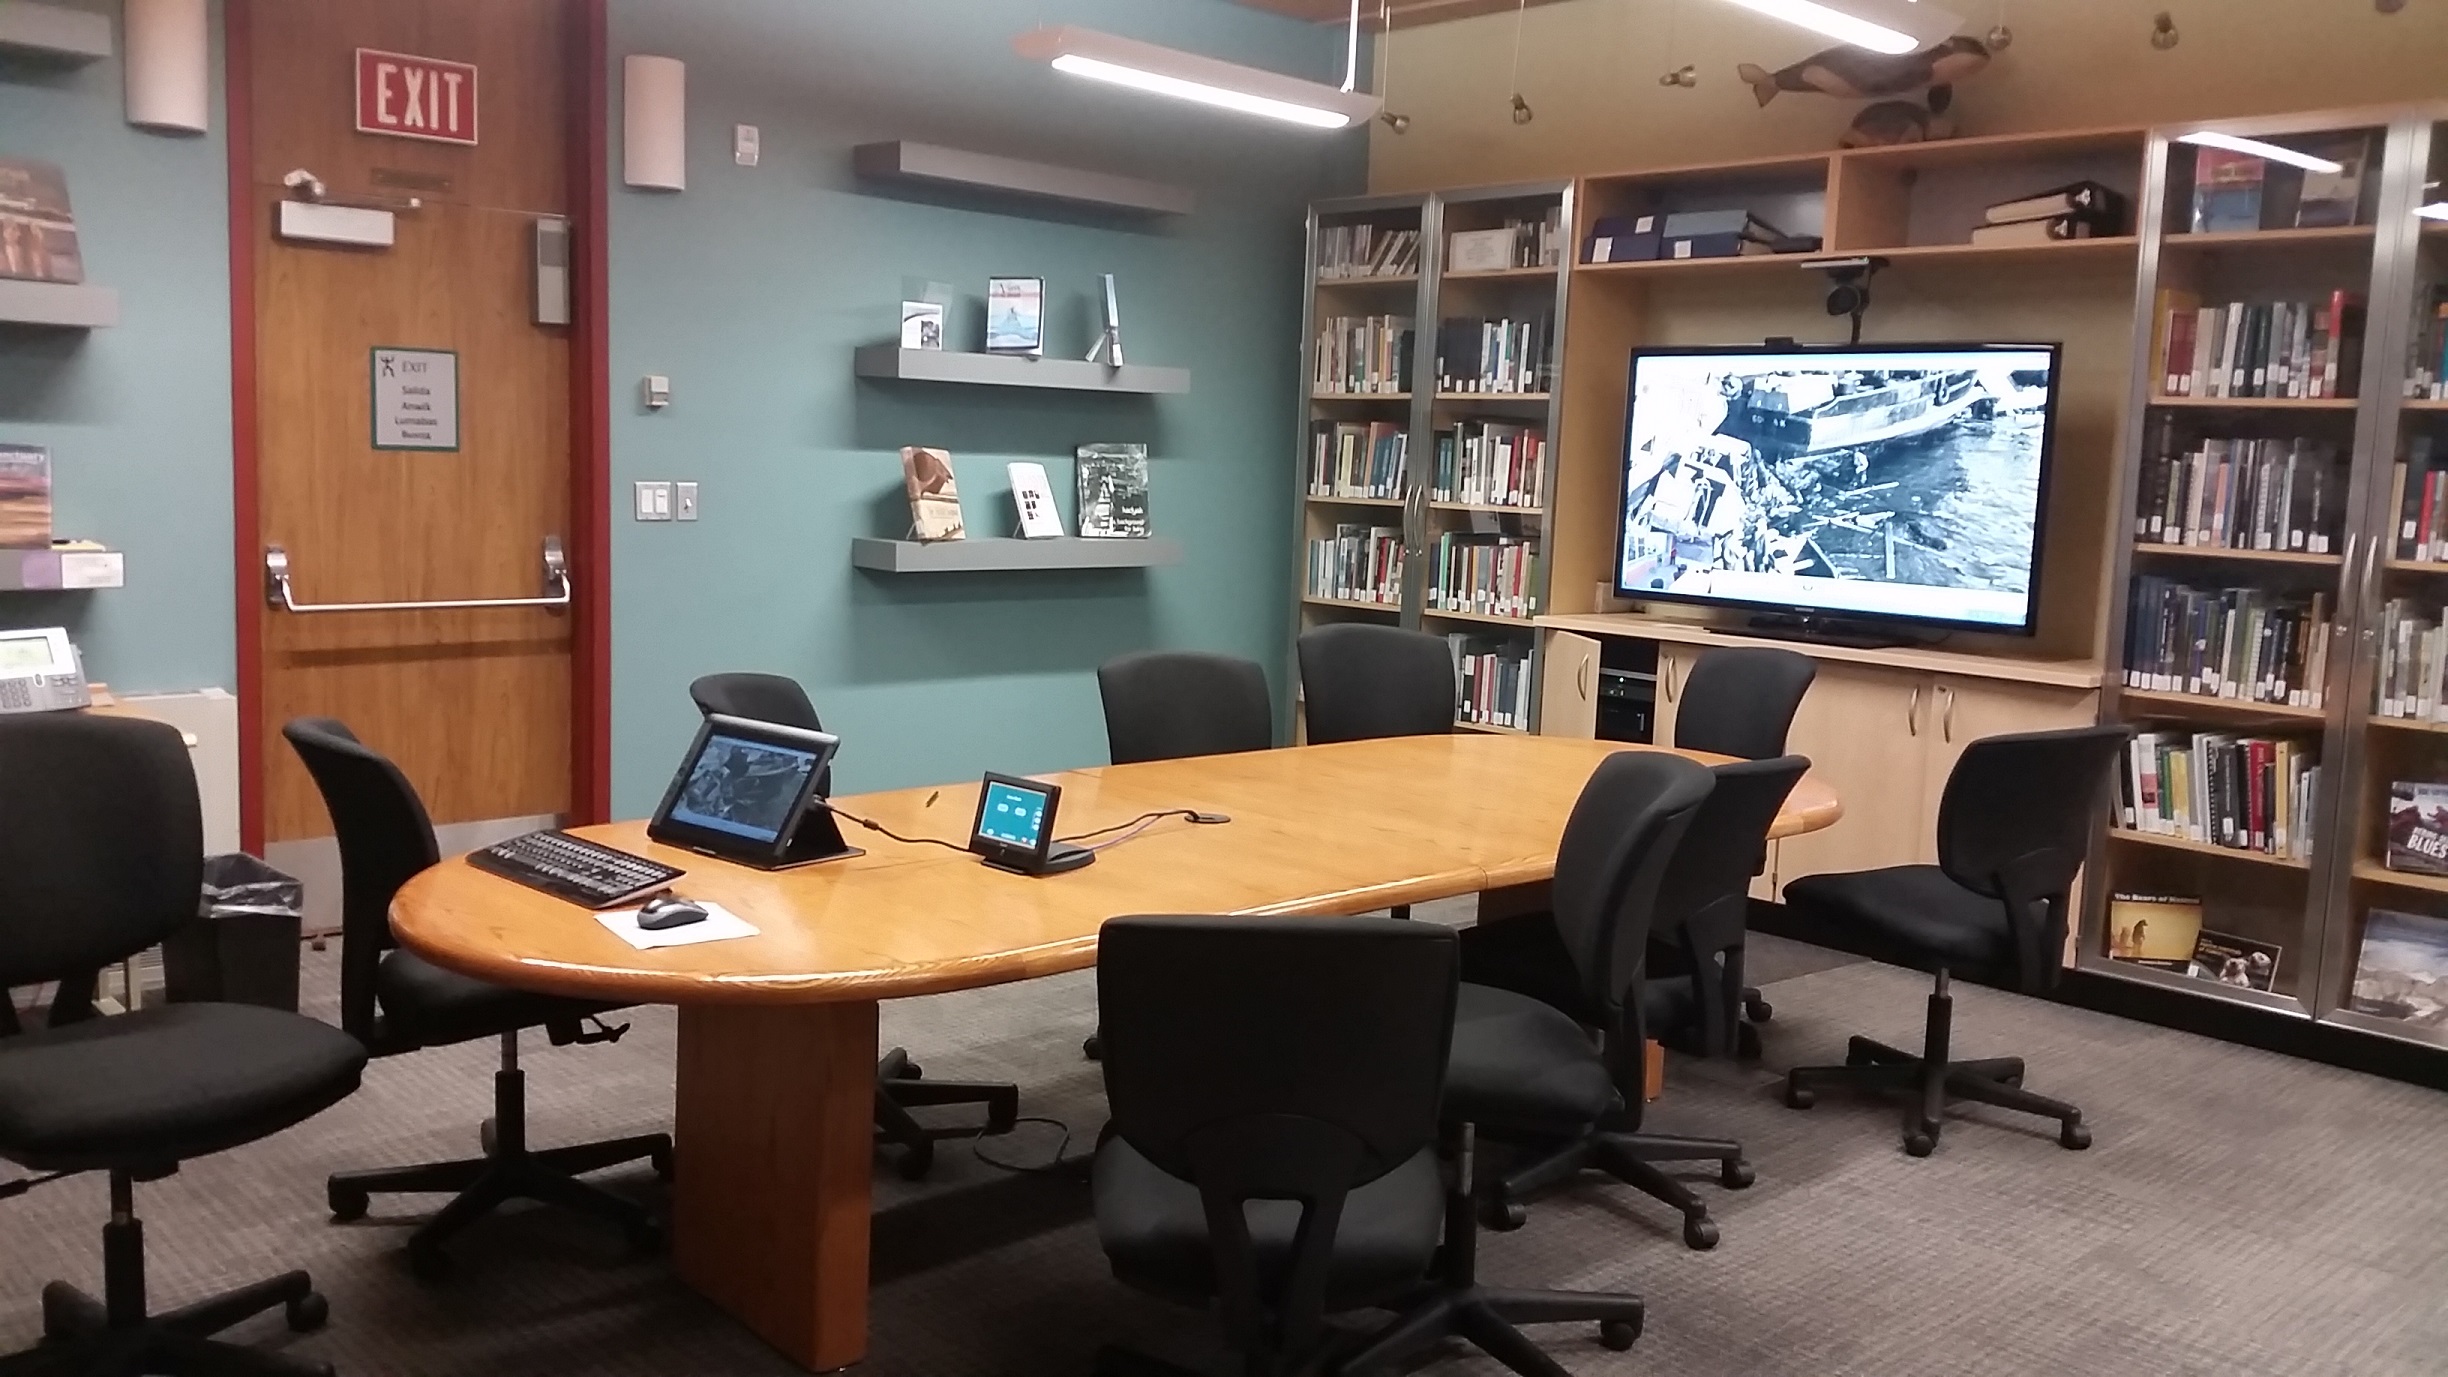 Panoramic view of the Kodiak room showing conference table, big screen tv, and bookshelves